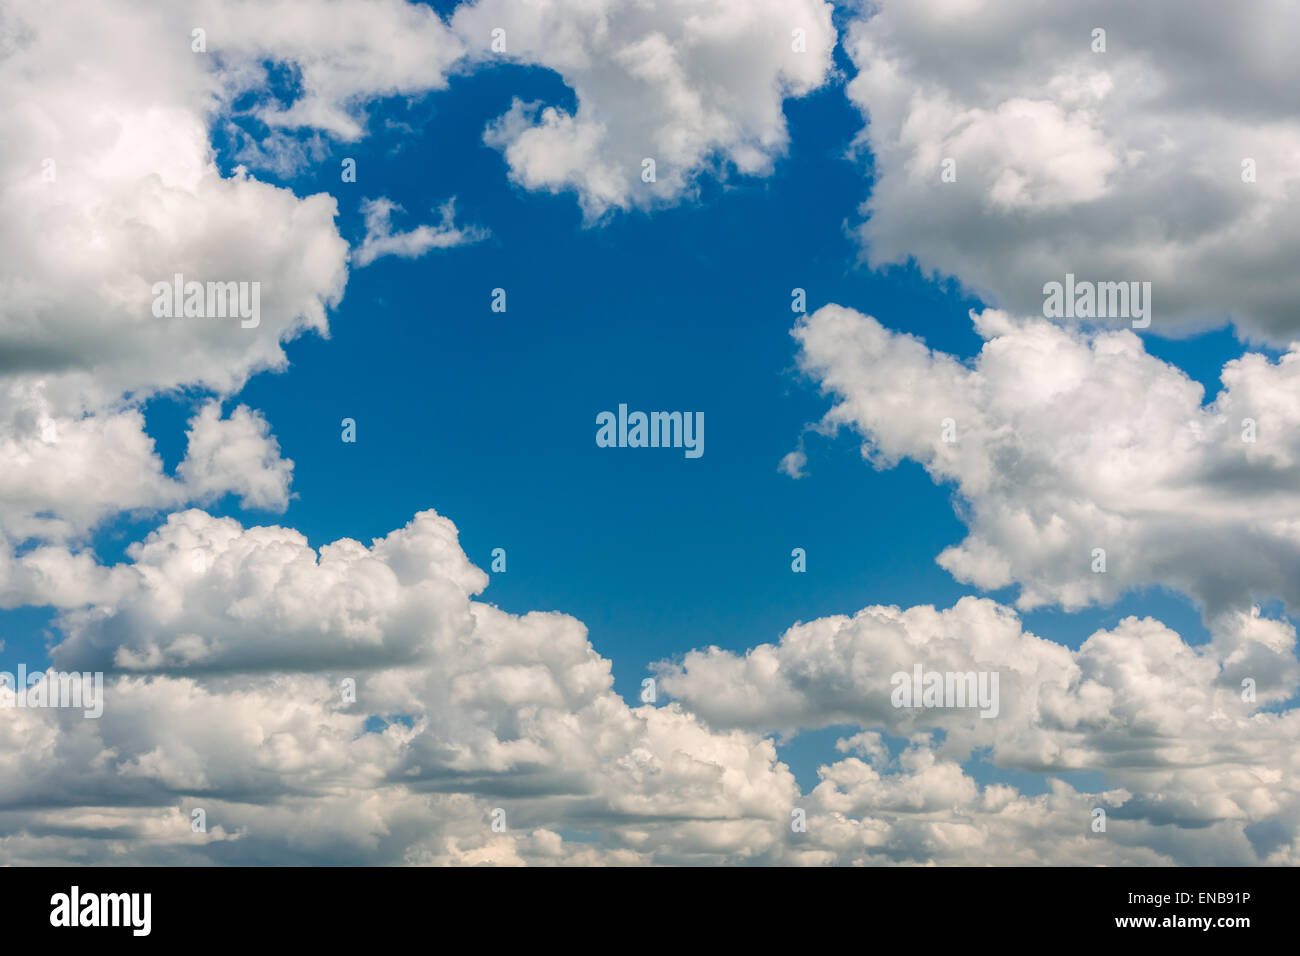 The clouds part to reveal a blue sky during fine spring weather. Stock Photo